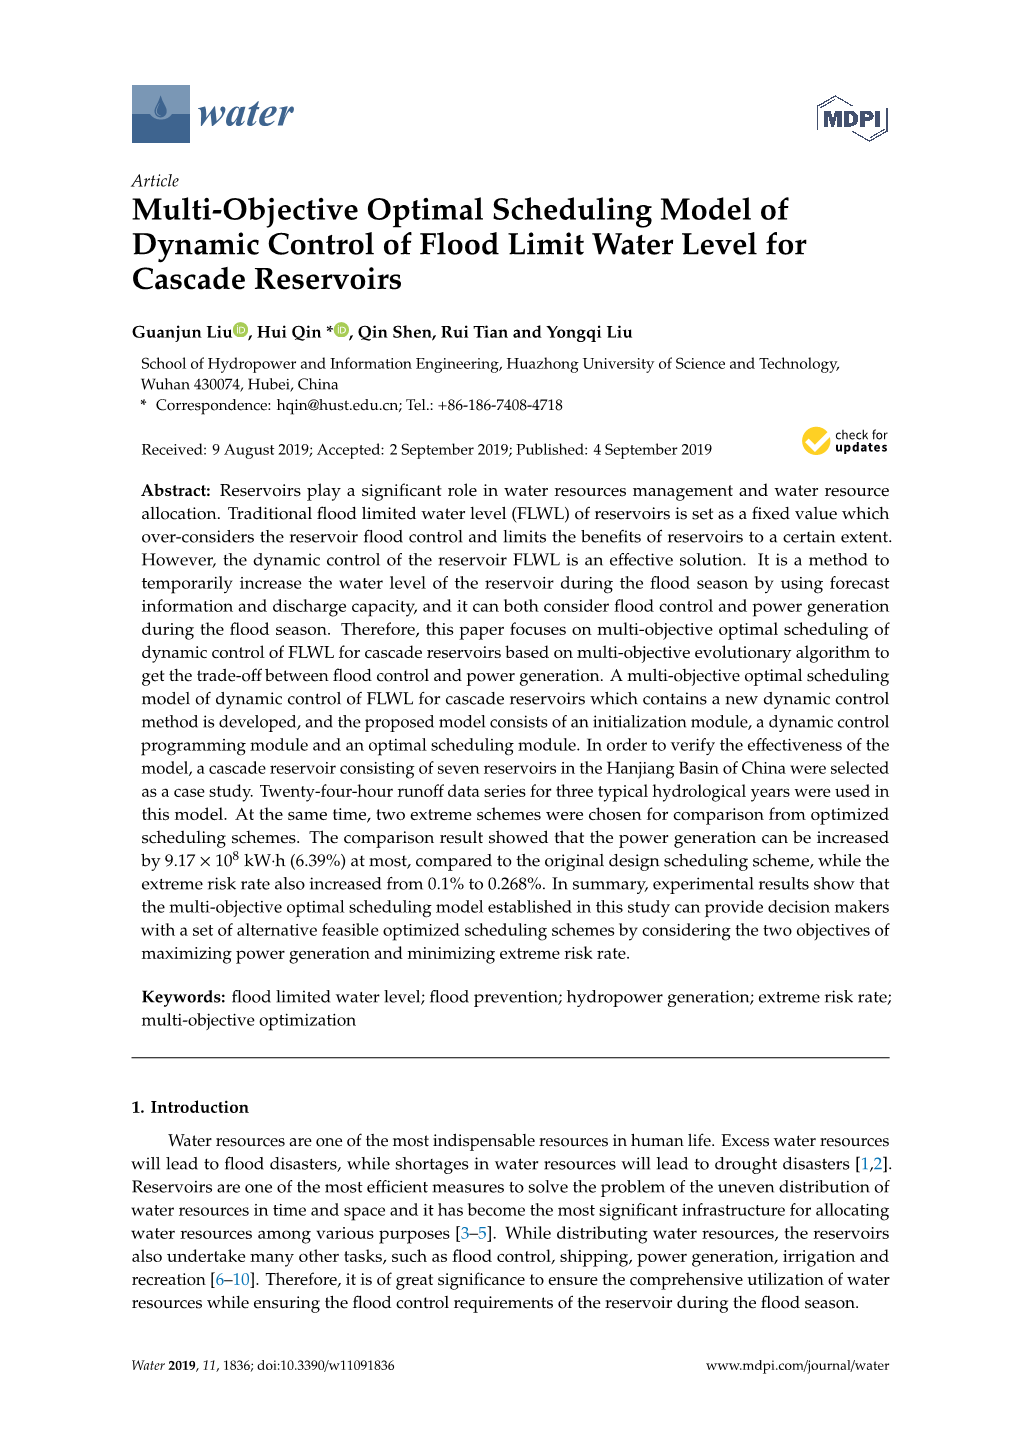 Multi-Objective Optimal Scheduling Model of Dynamic Control of Flood Limit Water Level for Cascade Reservoirs